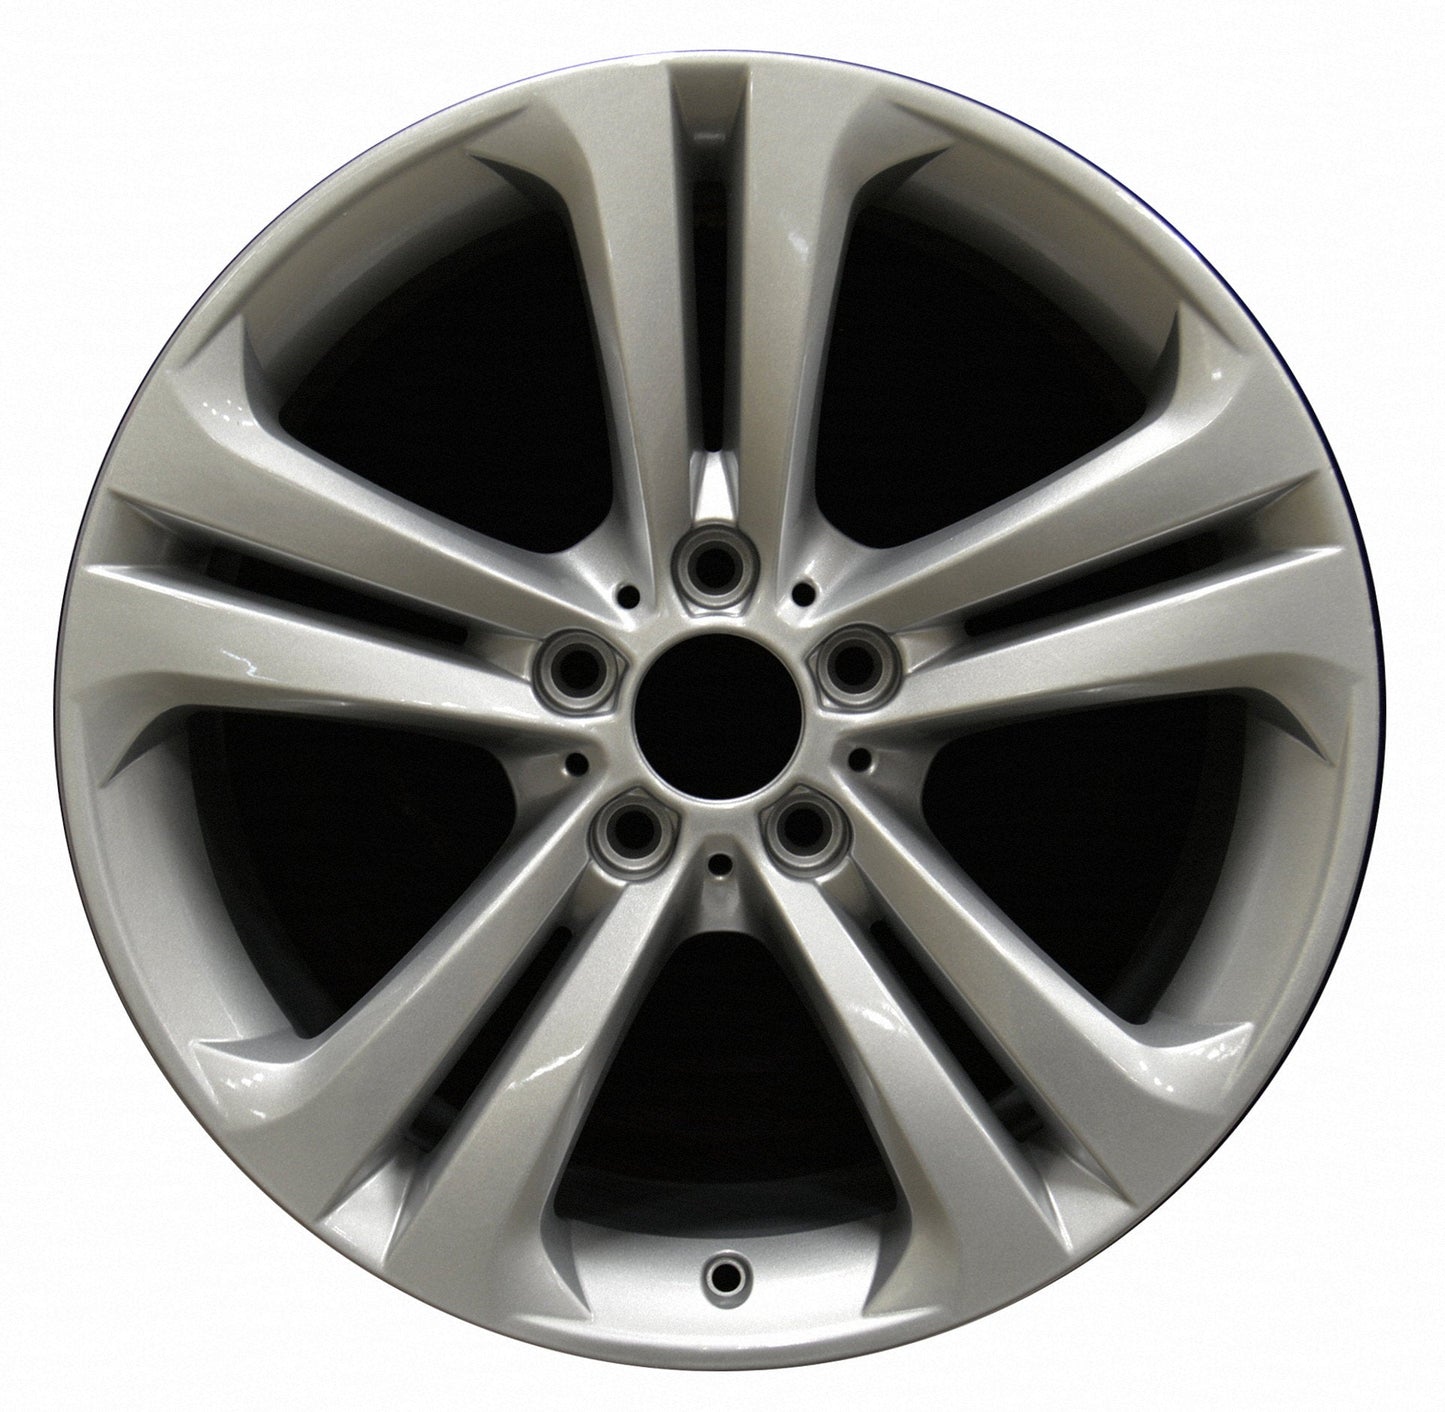 BMW 328i  2012, 2013, 2014 Factory OEM Car Wheel Size 19x8.5 Alloy WAO.71547RE.PS01.FF